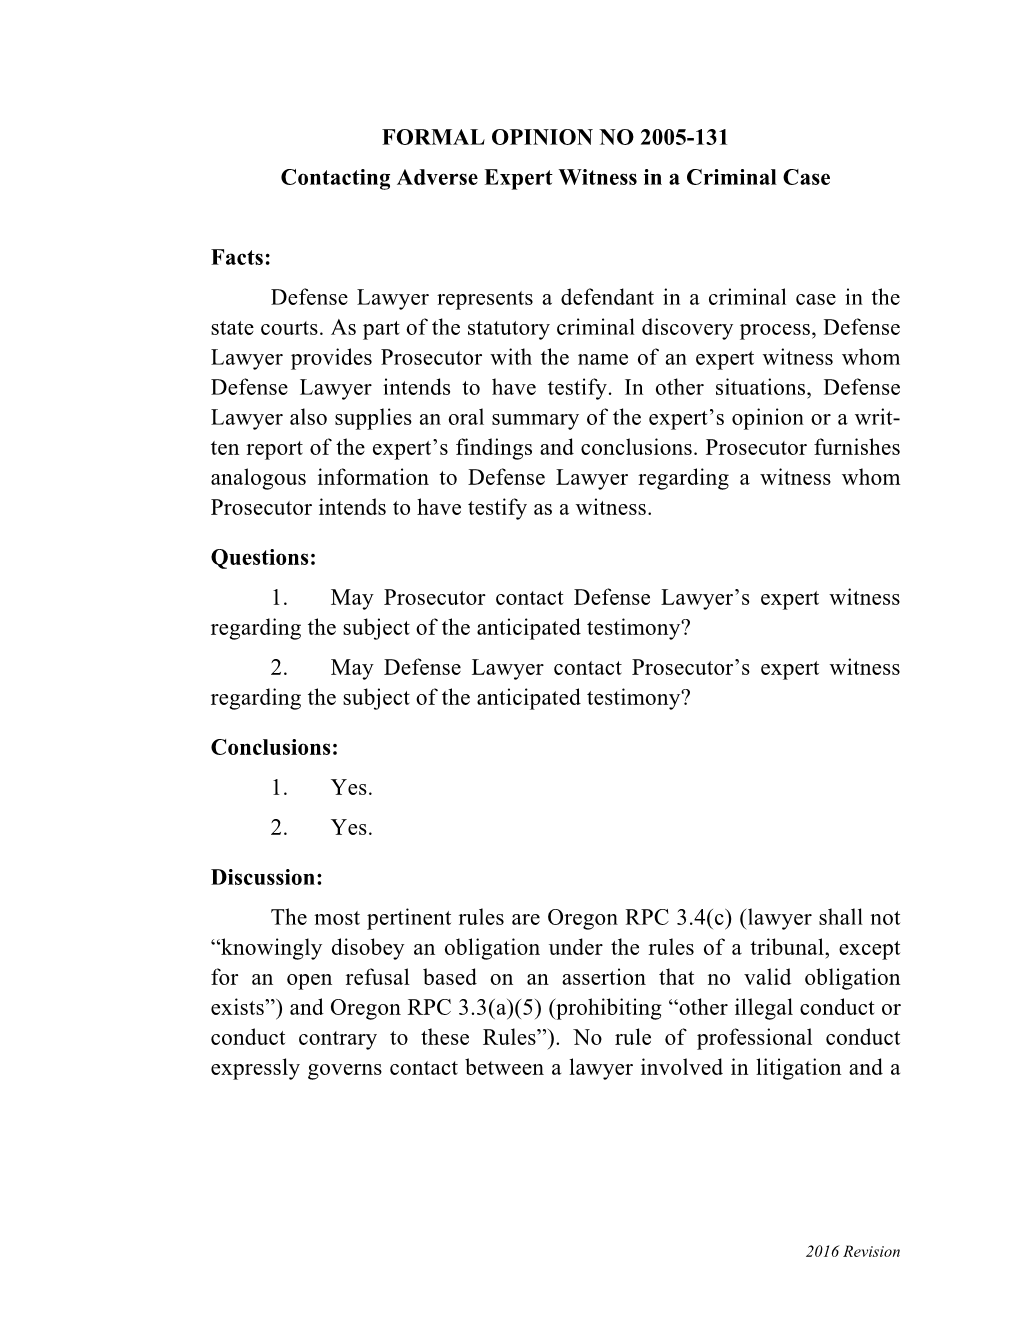 2005-131: Contacting Adverse Expert Witness in a Criminal Case